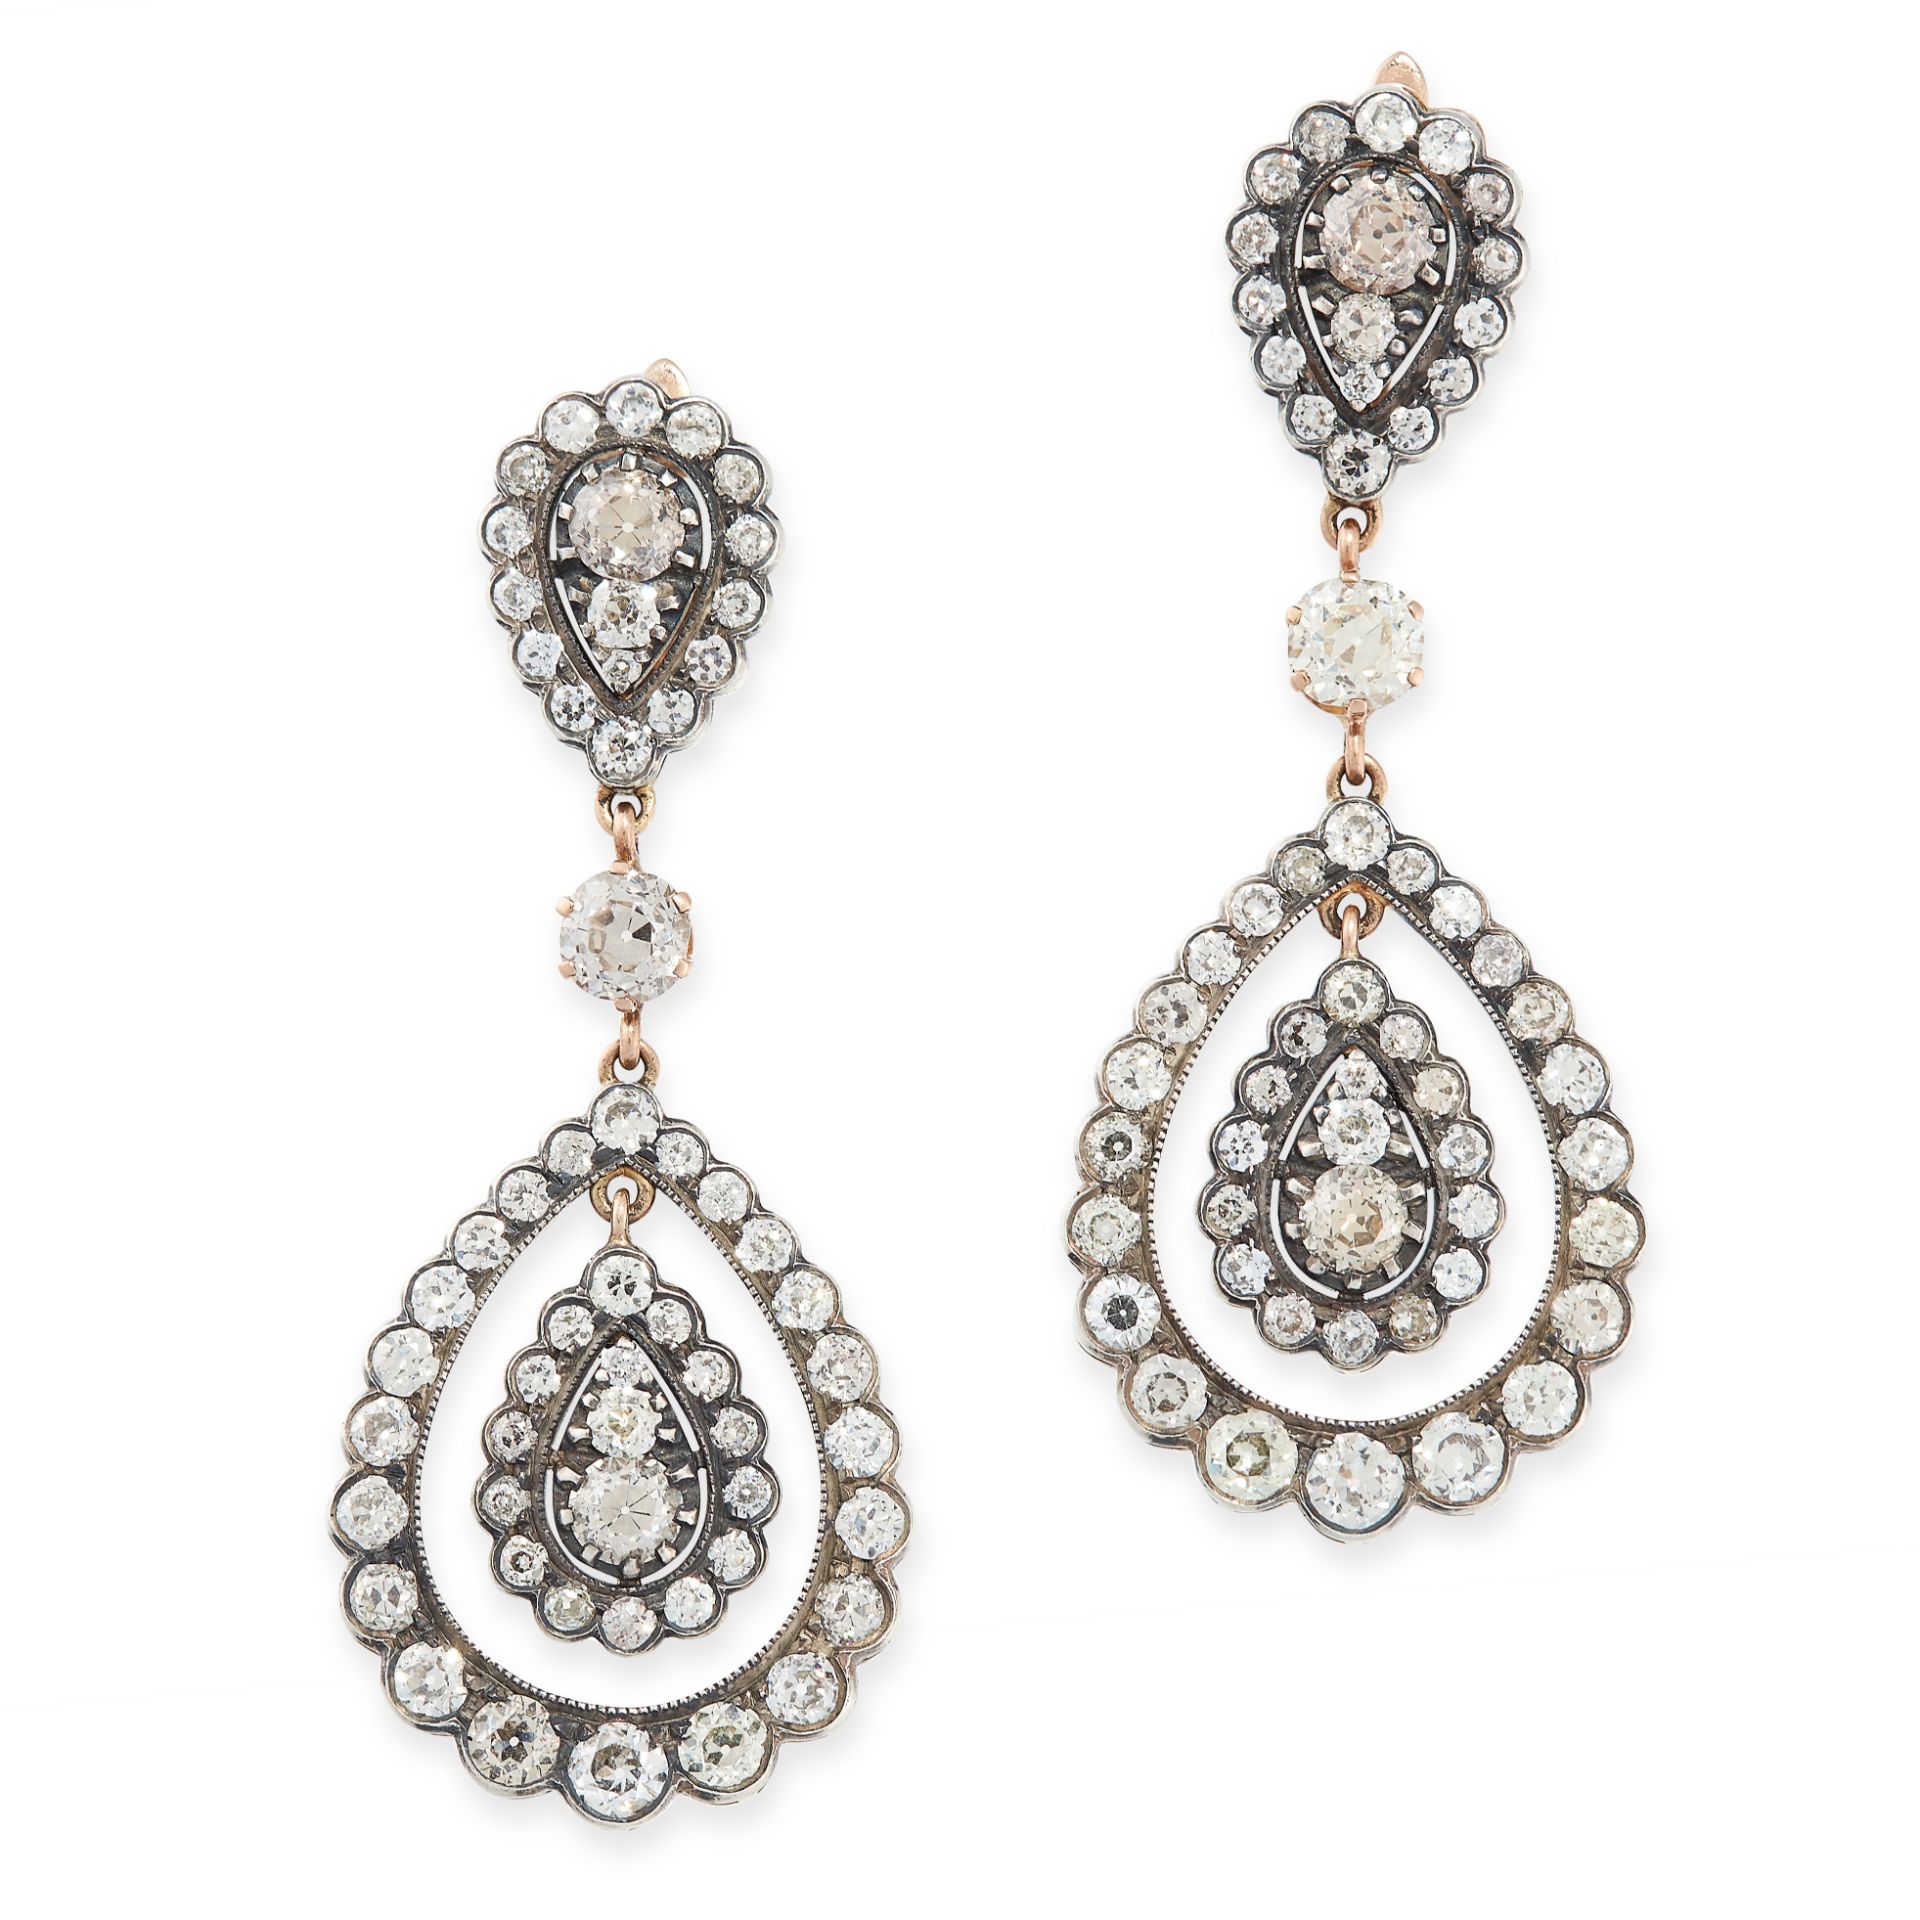 A PAIR OF ANTIQUE DIAMOND DROP EARRINGS, 19TH CENTURY in yellow gold and silver, each comprising a